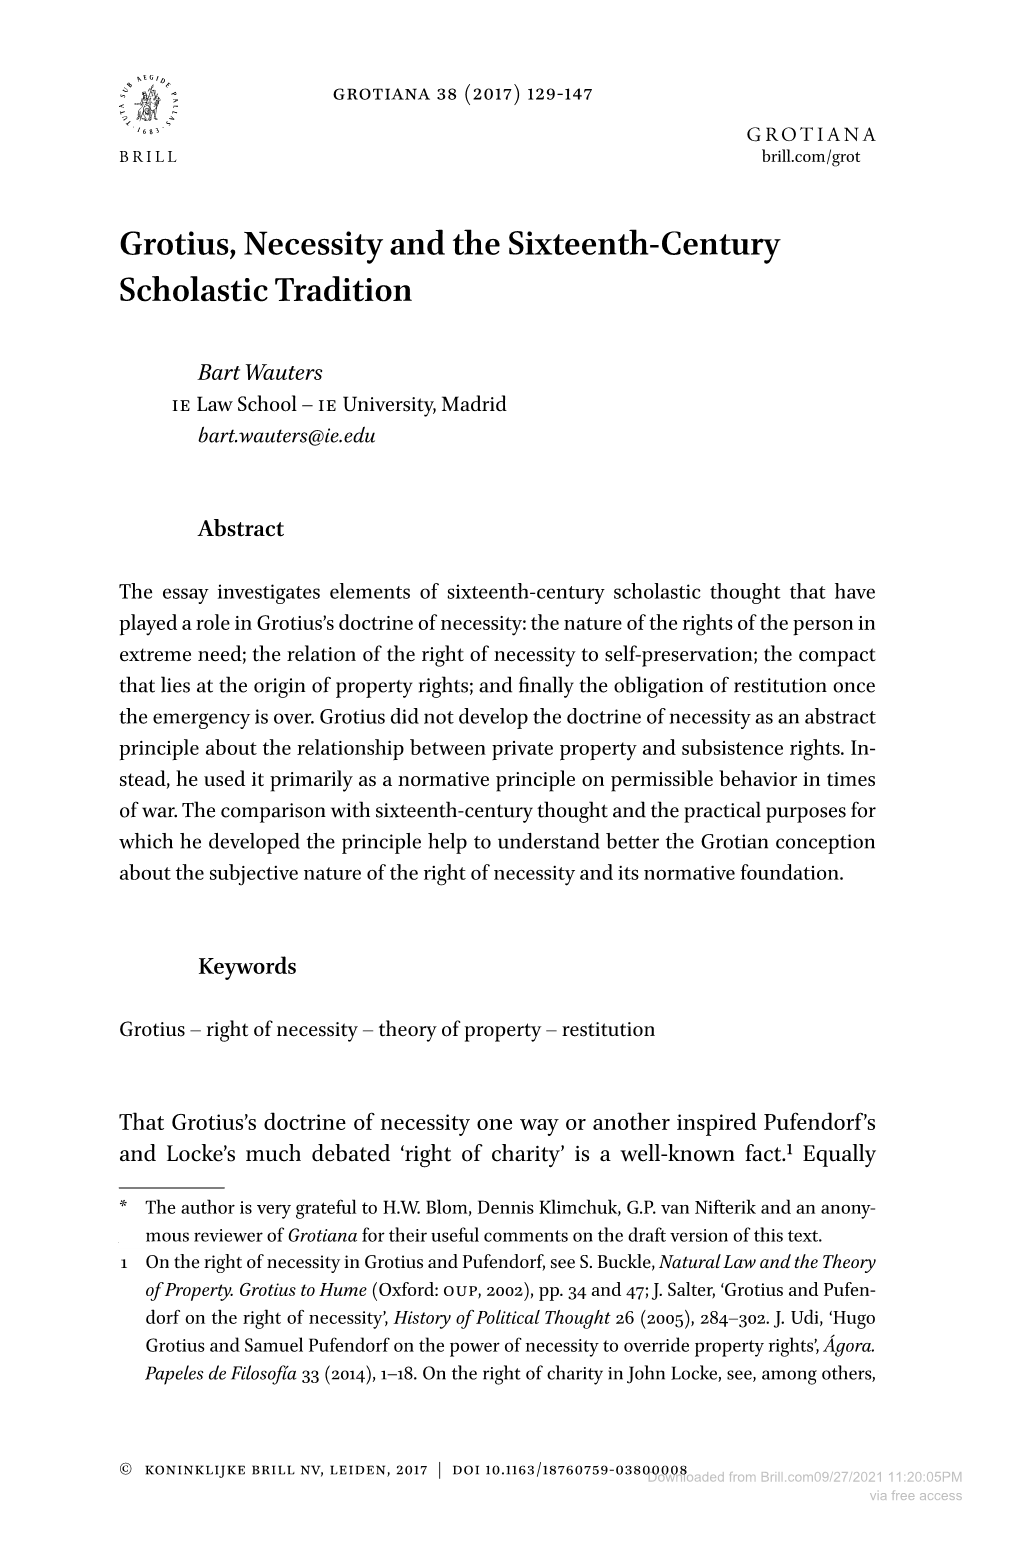 Grotius, Necessity and the Sixteenth-Century Scholastic Tradition